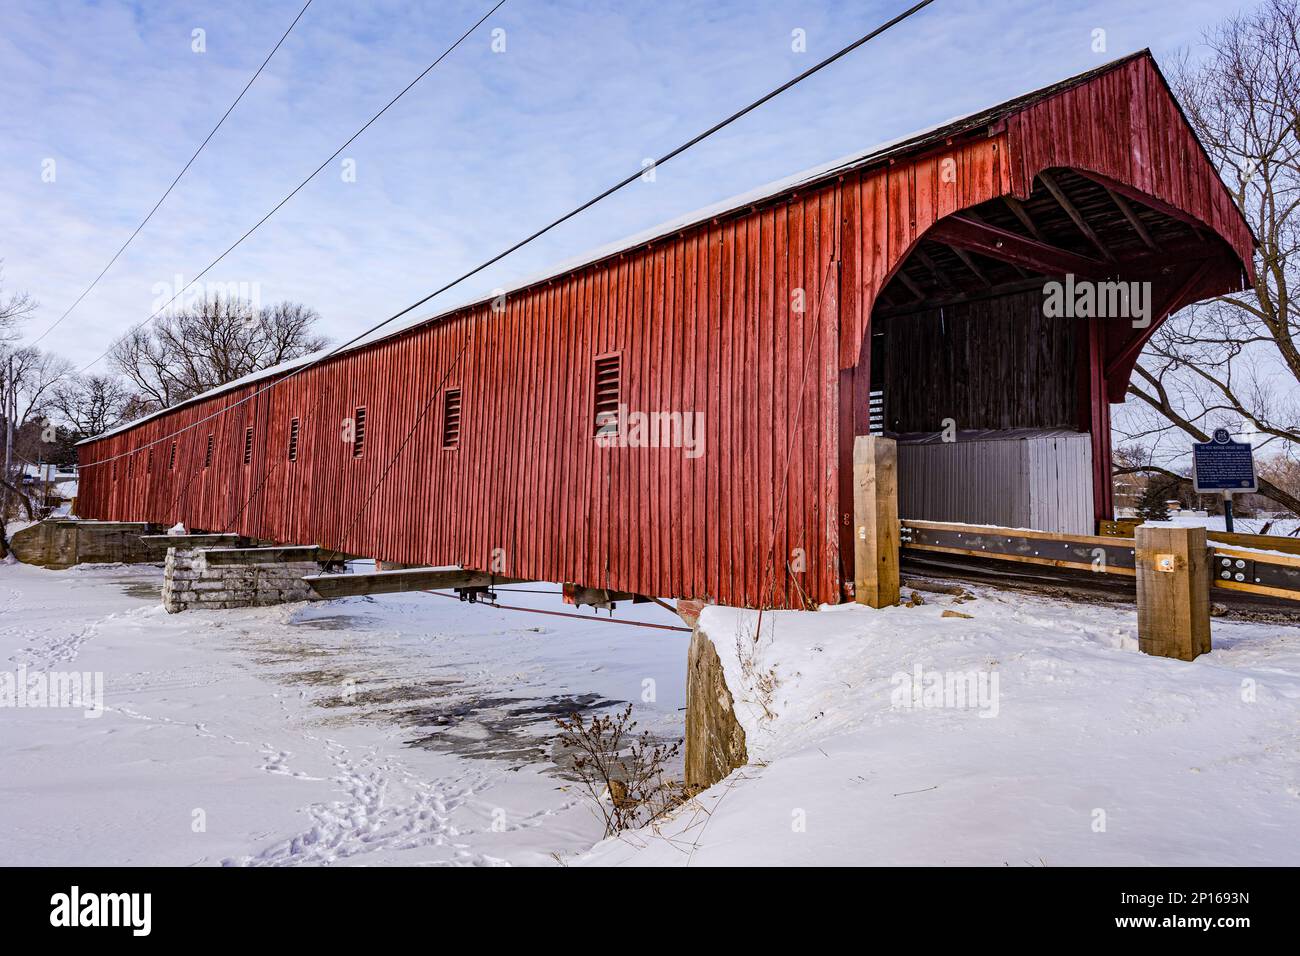 North of Kitchener, Ontario, the West Montrose Covered Bridge (also known as the Kissing Bridge) is one of the oldest of its kind in Canada. Stock Photo